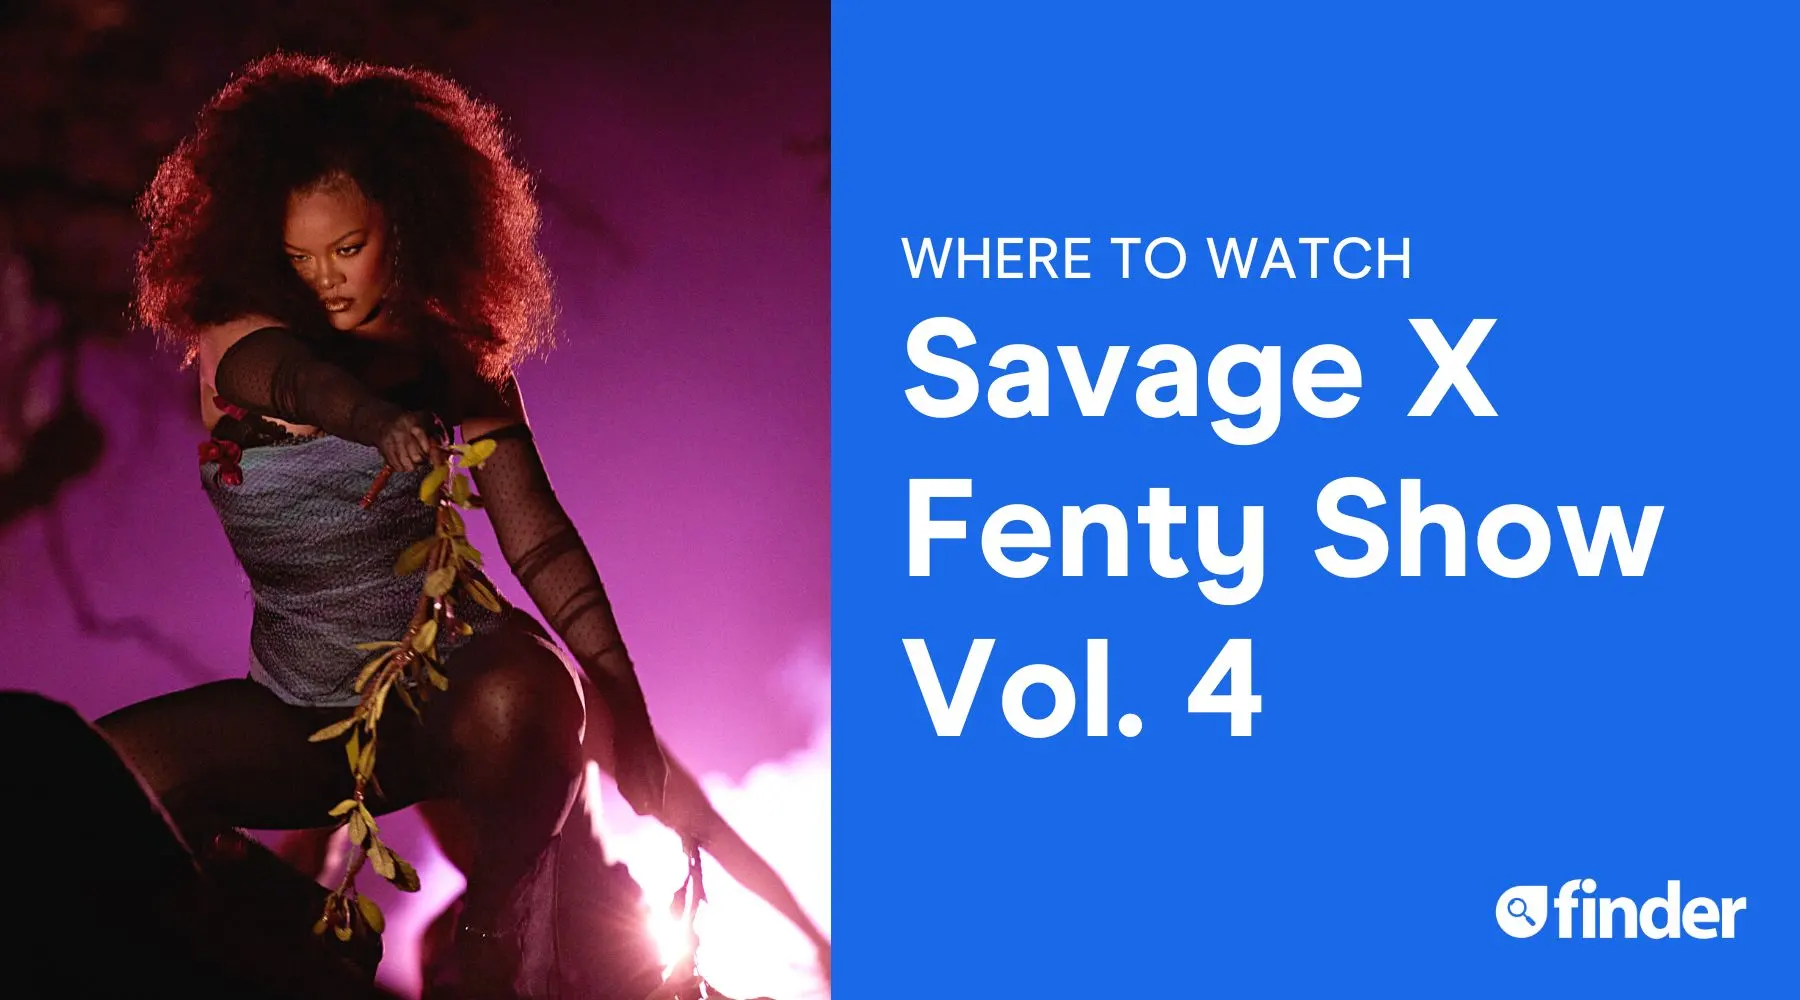 Savage X Fenty Show Vol. 4: How to Watch, Who is Modeling, Who Are